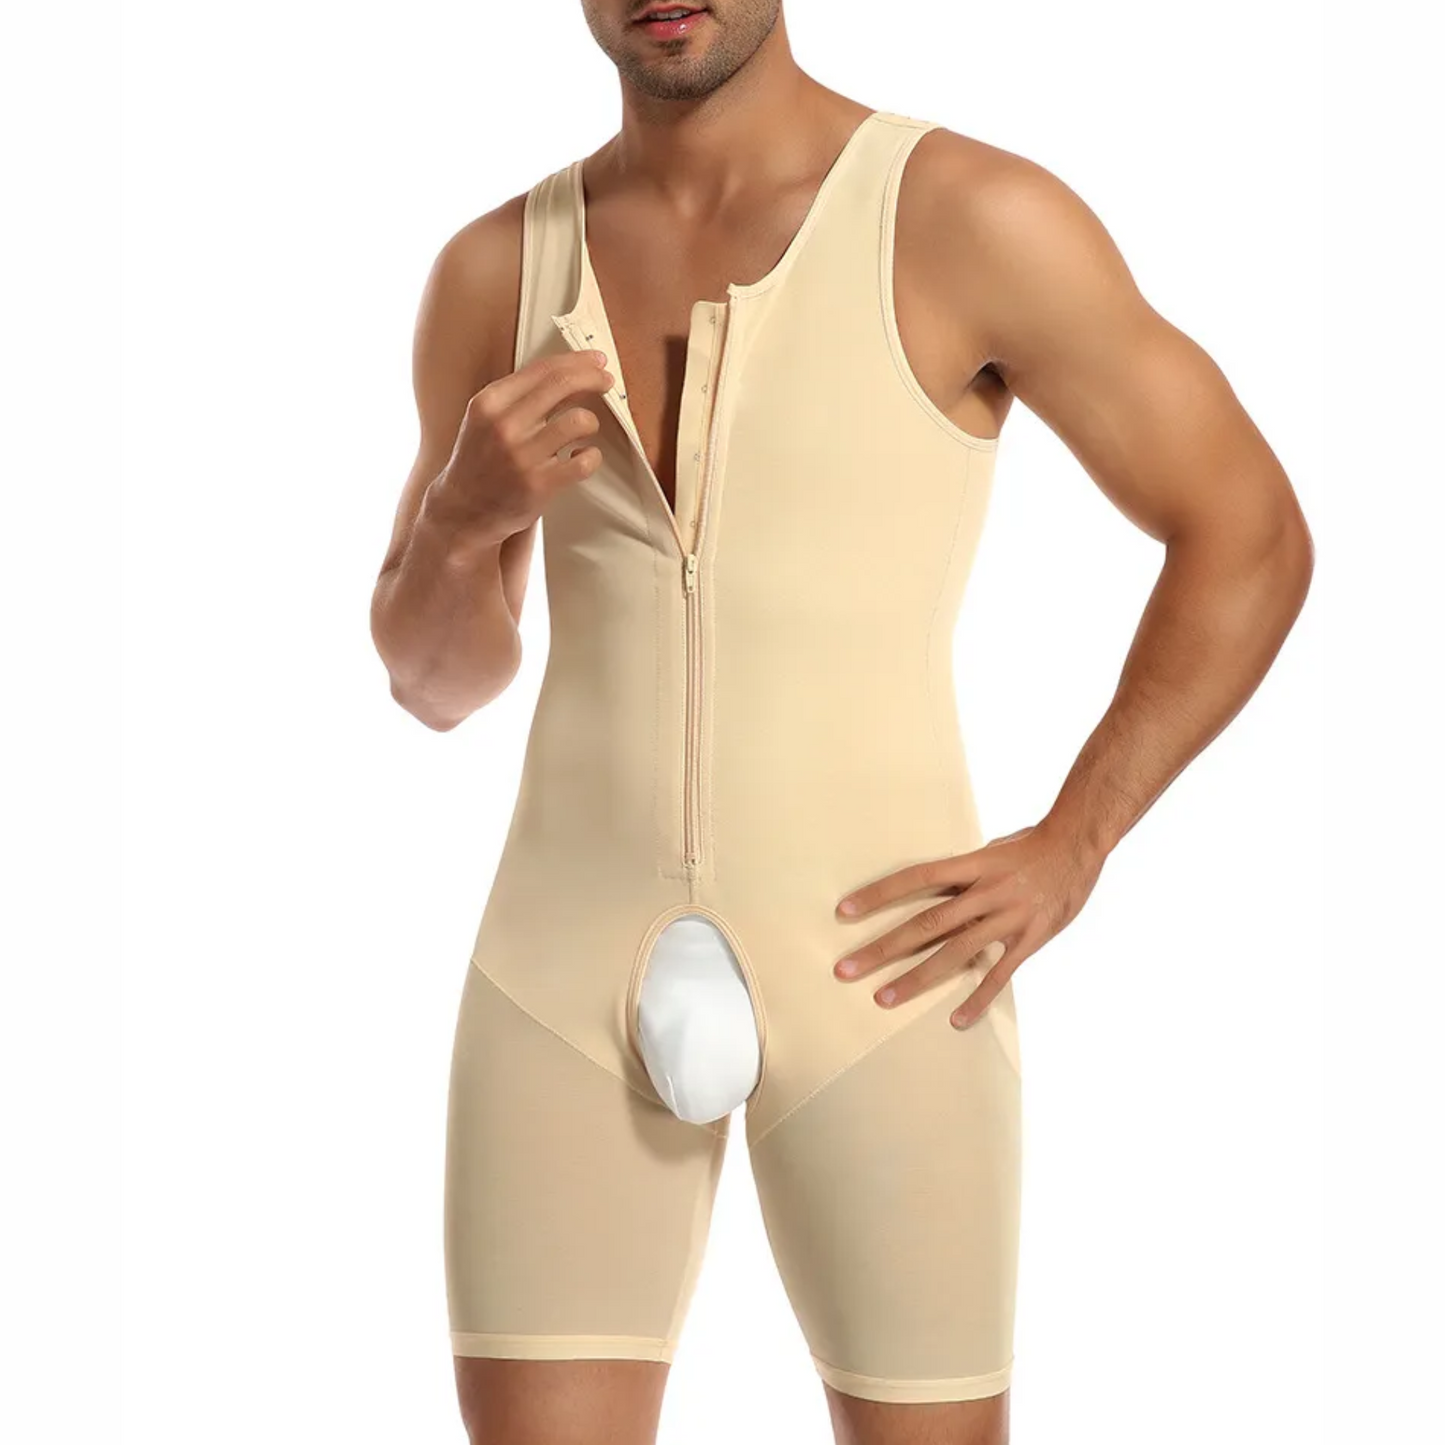 Men's Full Body Compression Shaper With Butt Pads